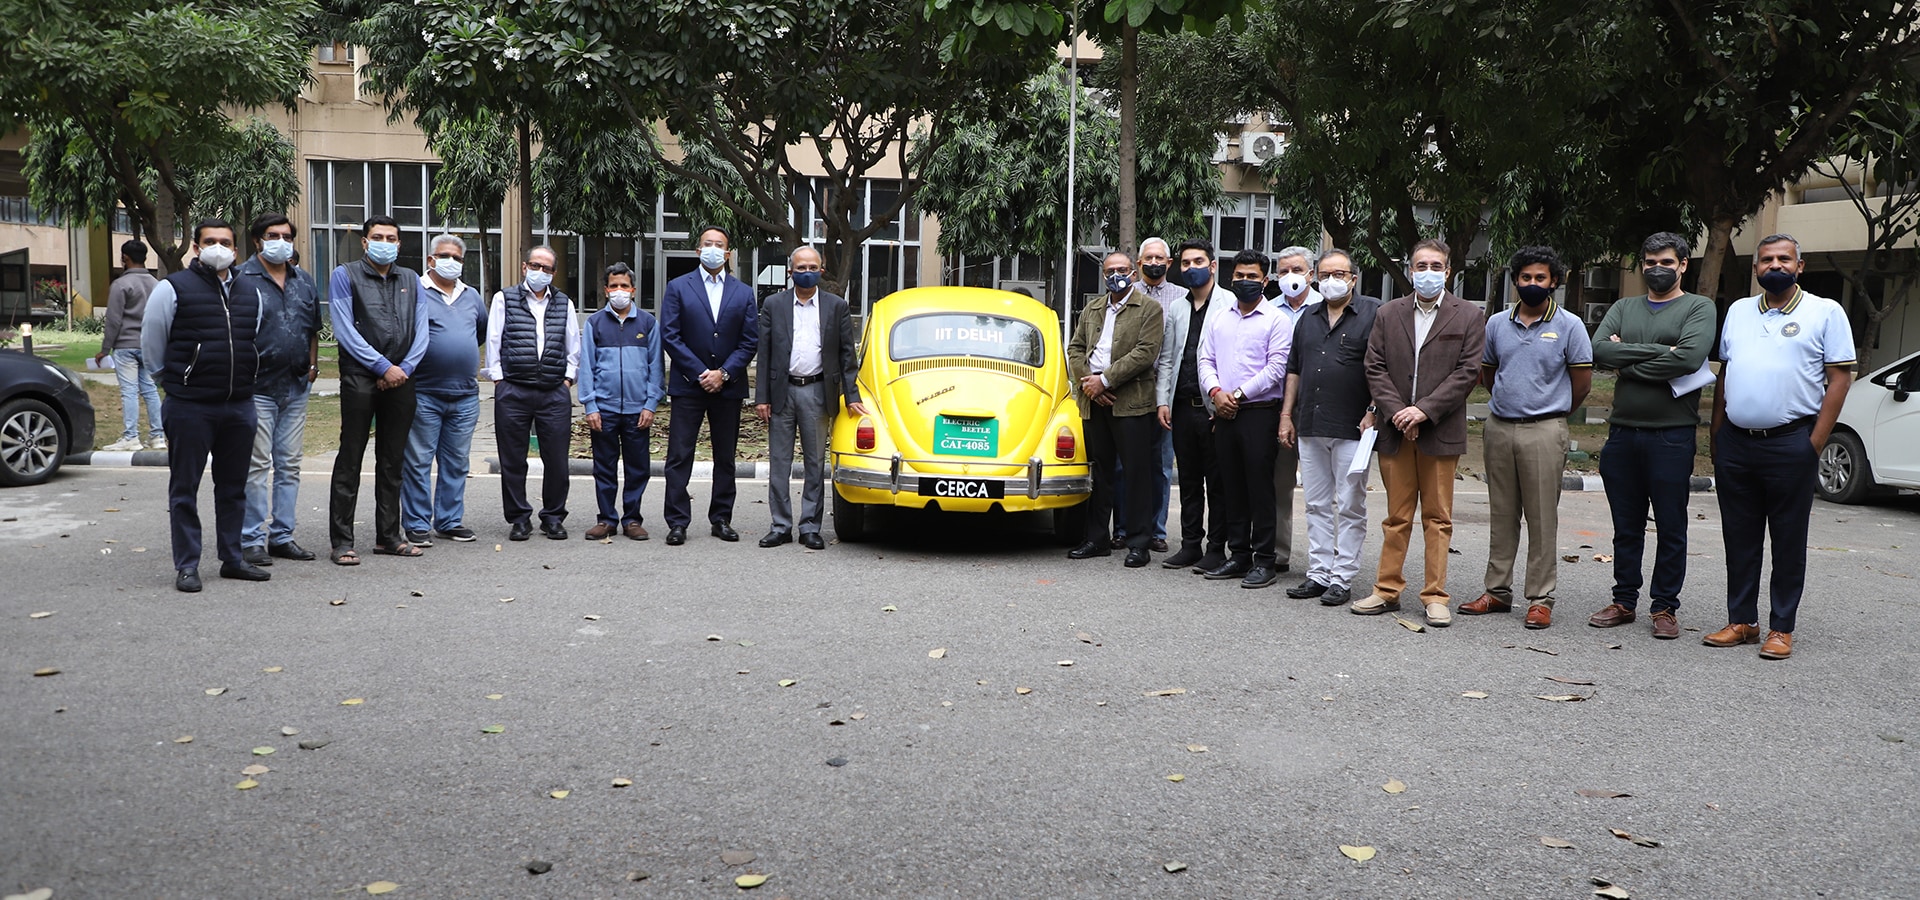 The launch program of Electric Beetle was attended by several members of the Heritage motoring club of India.